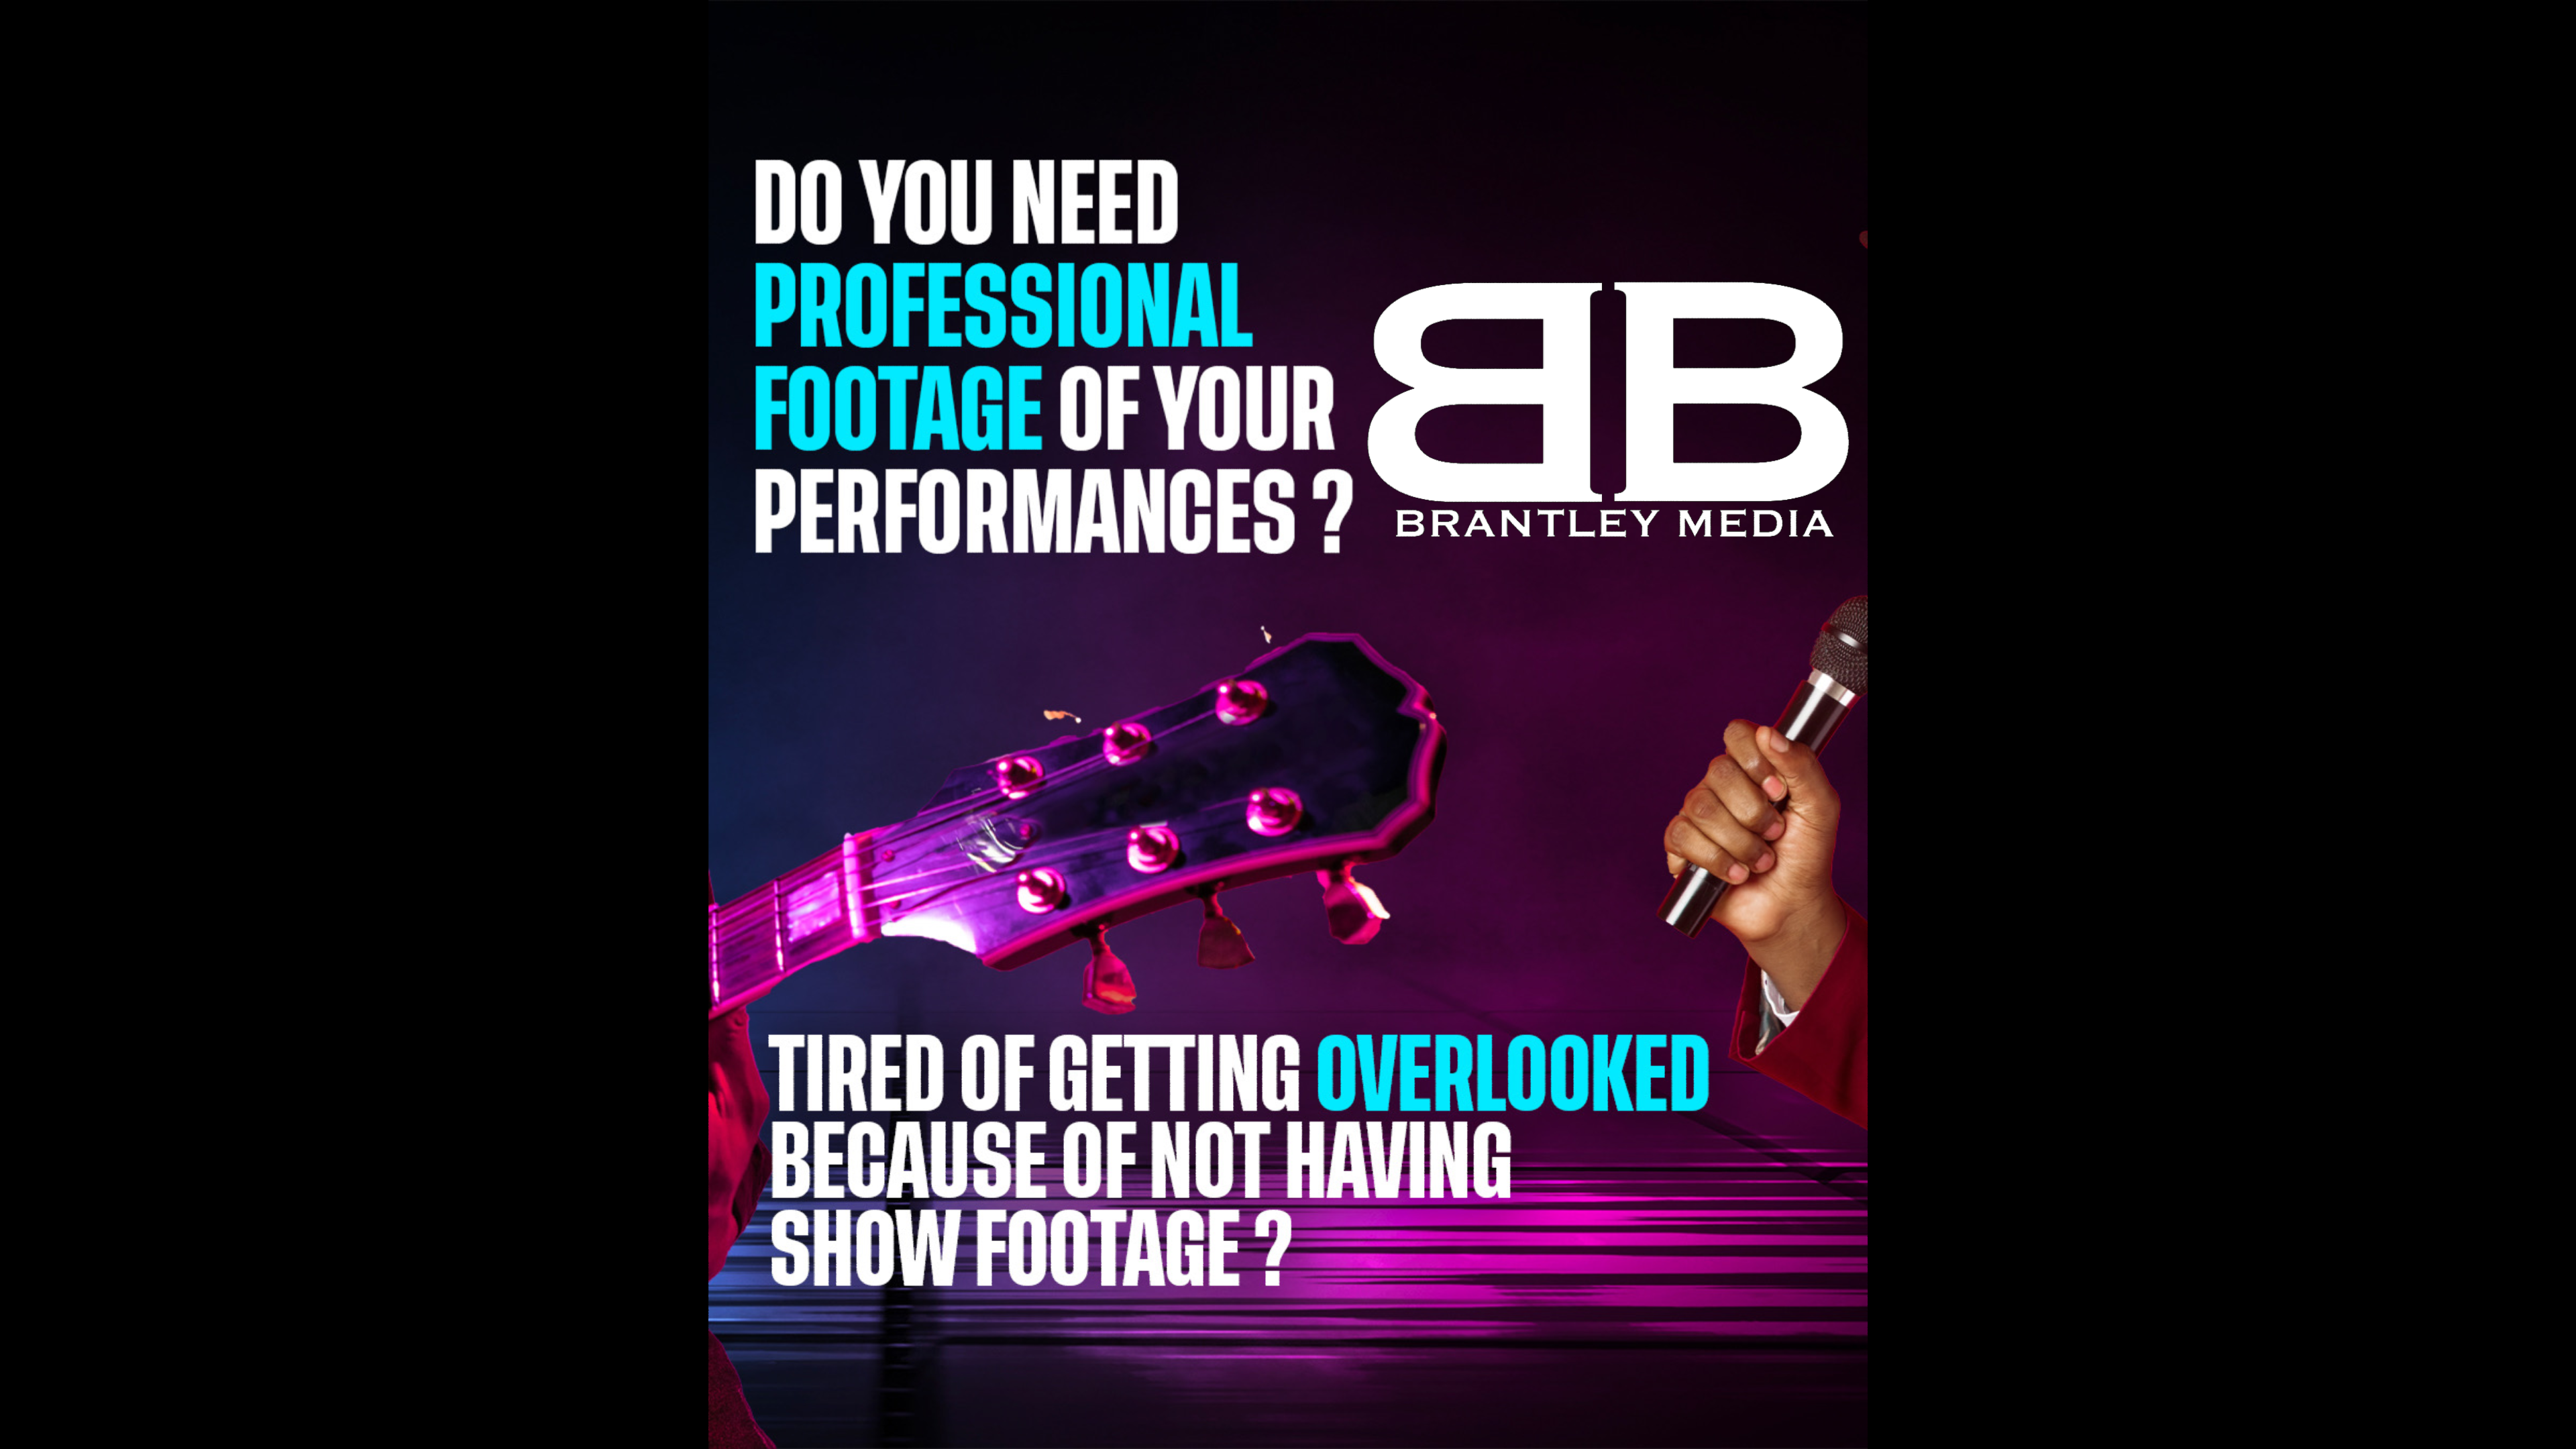 Video Streaming AD with Brantley Media logo